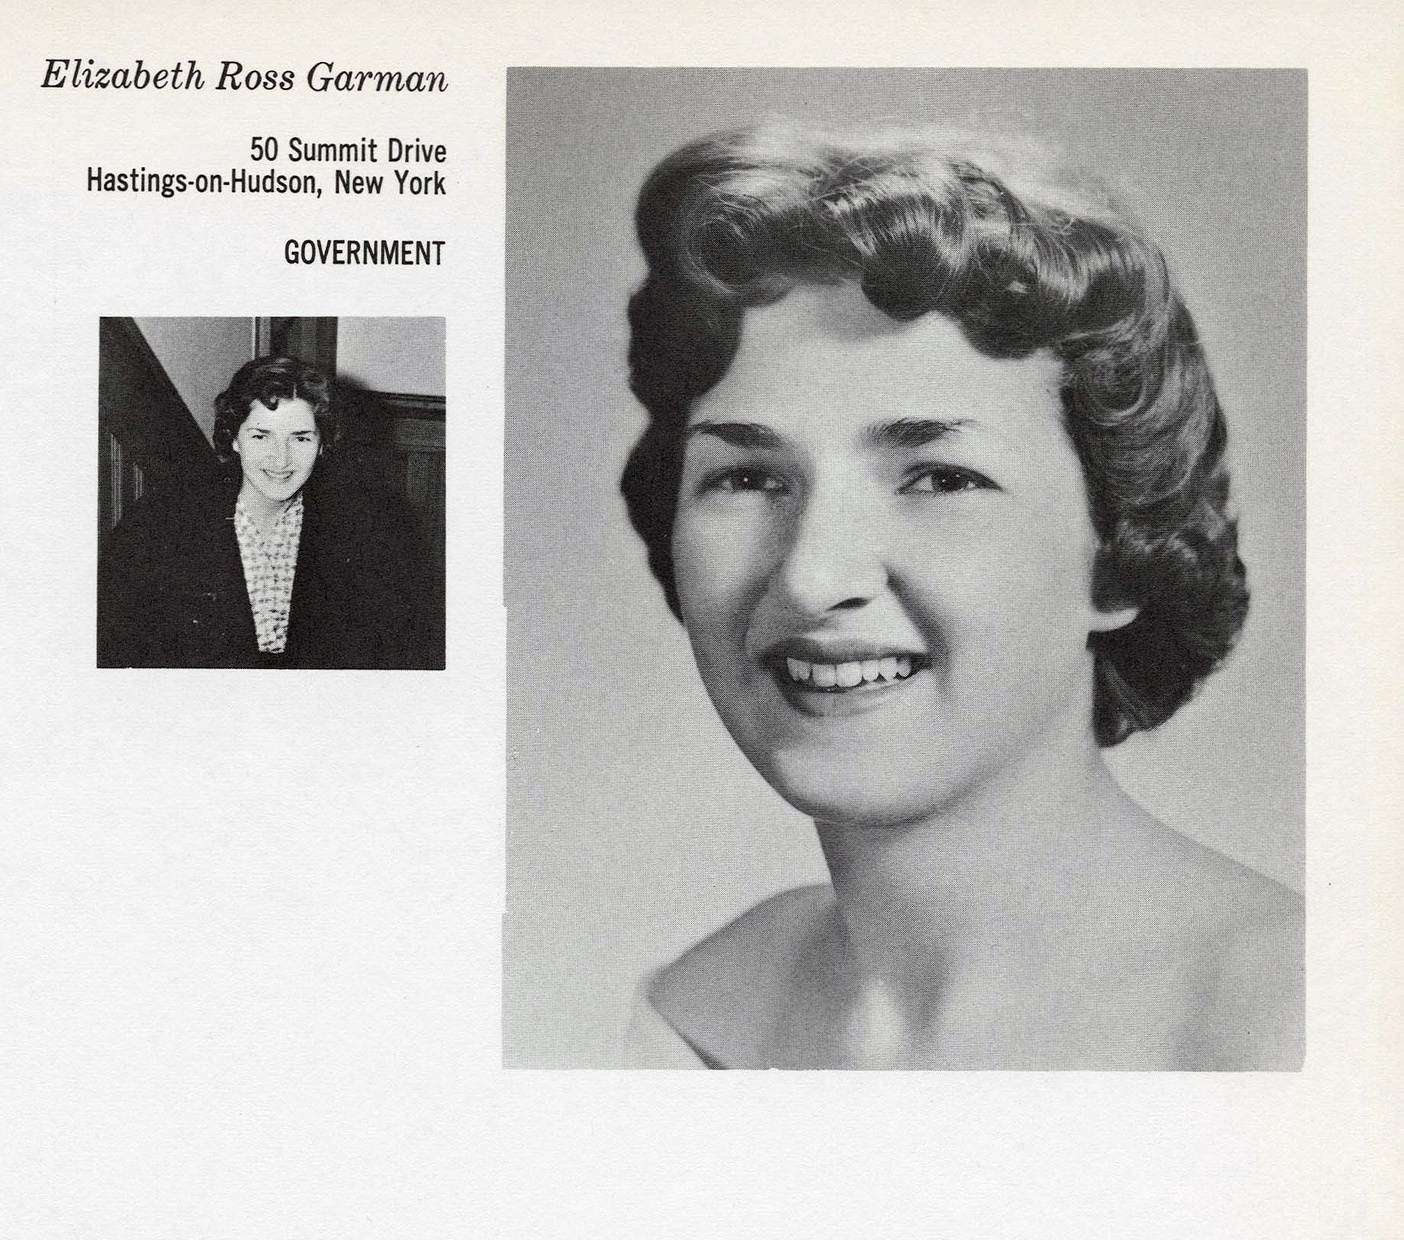 A black and white document has two photographs of the same young light-skinned woman smiling. Printed in top left corner is “Elizabeth Rose Garman” followed by a New York address and “Government.”